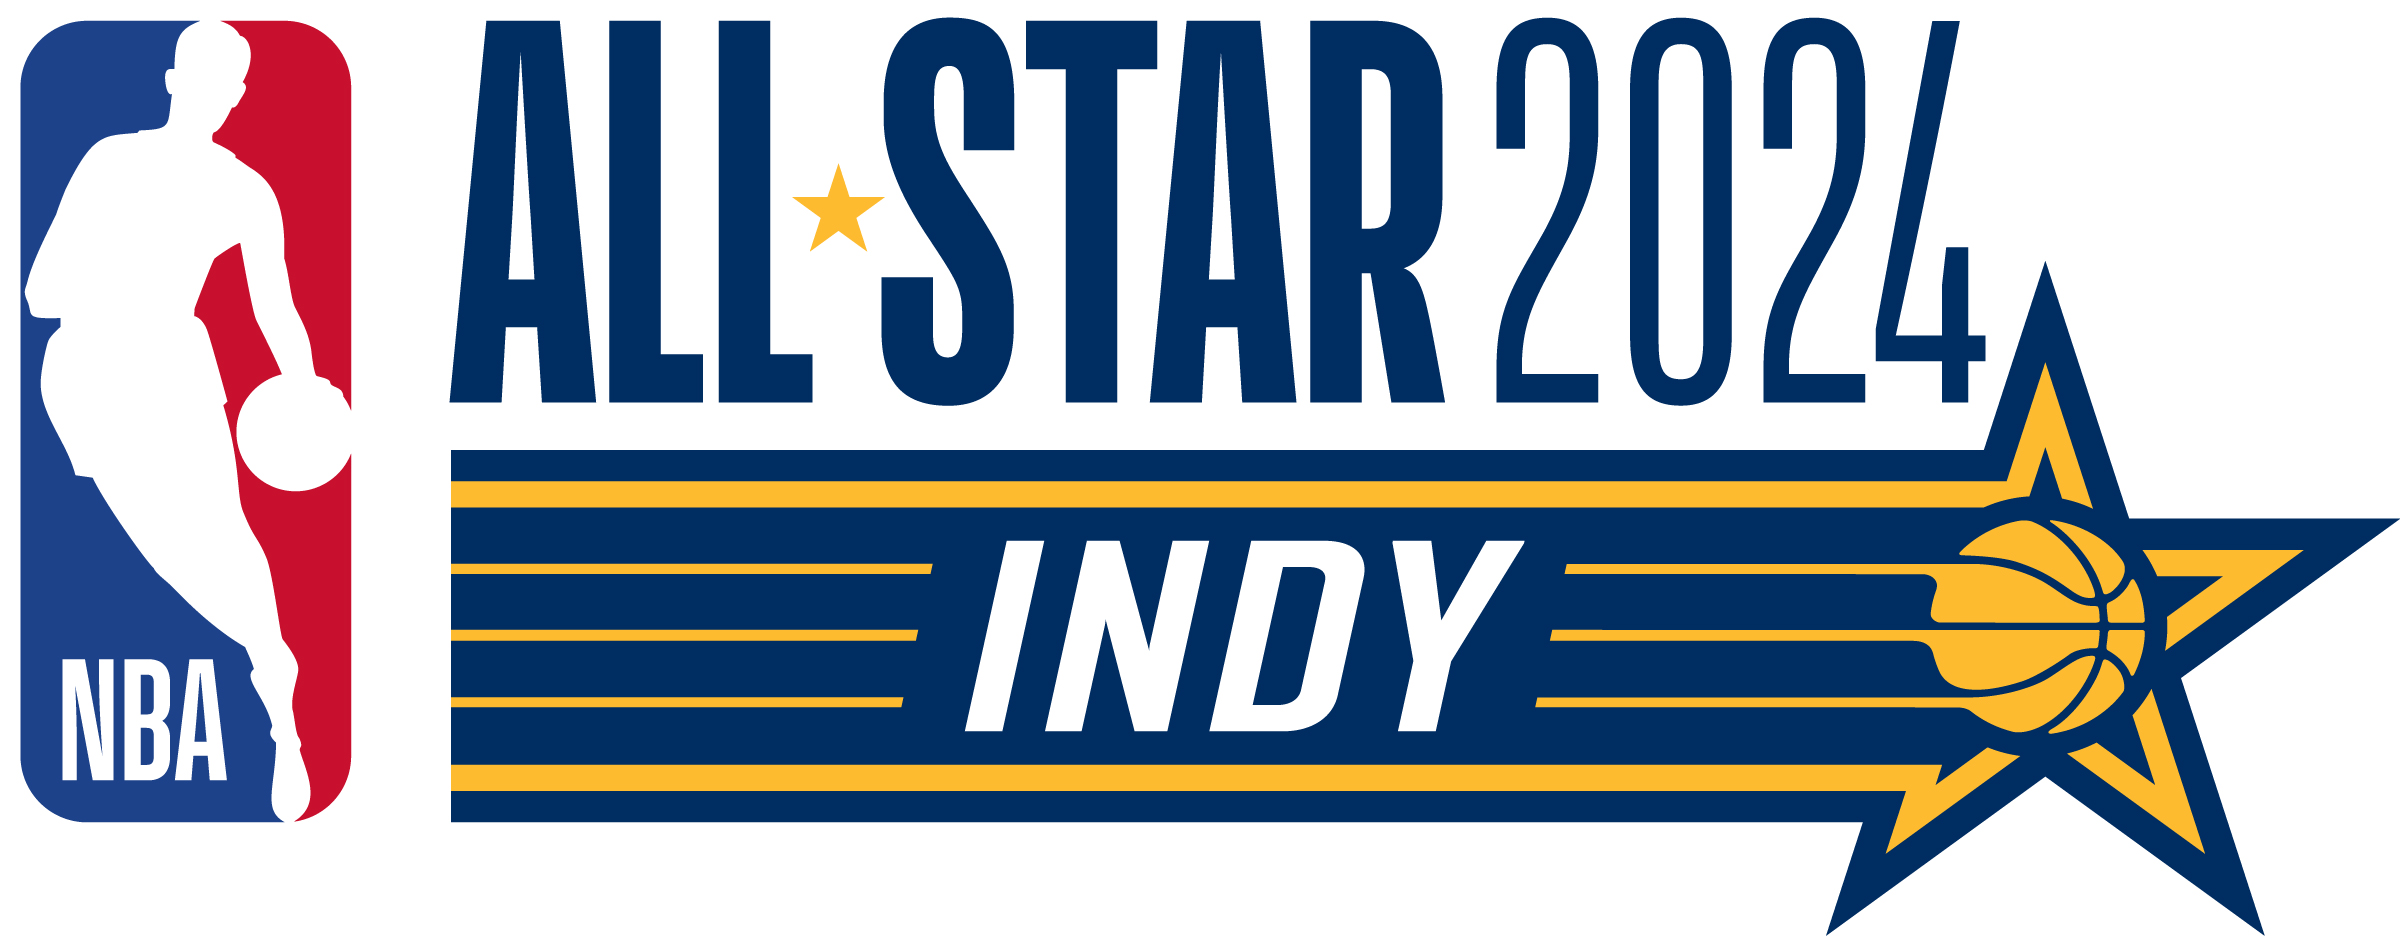 NBA All Star, Indy, 2024